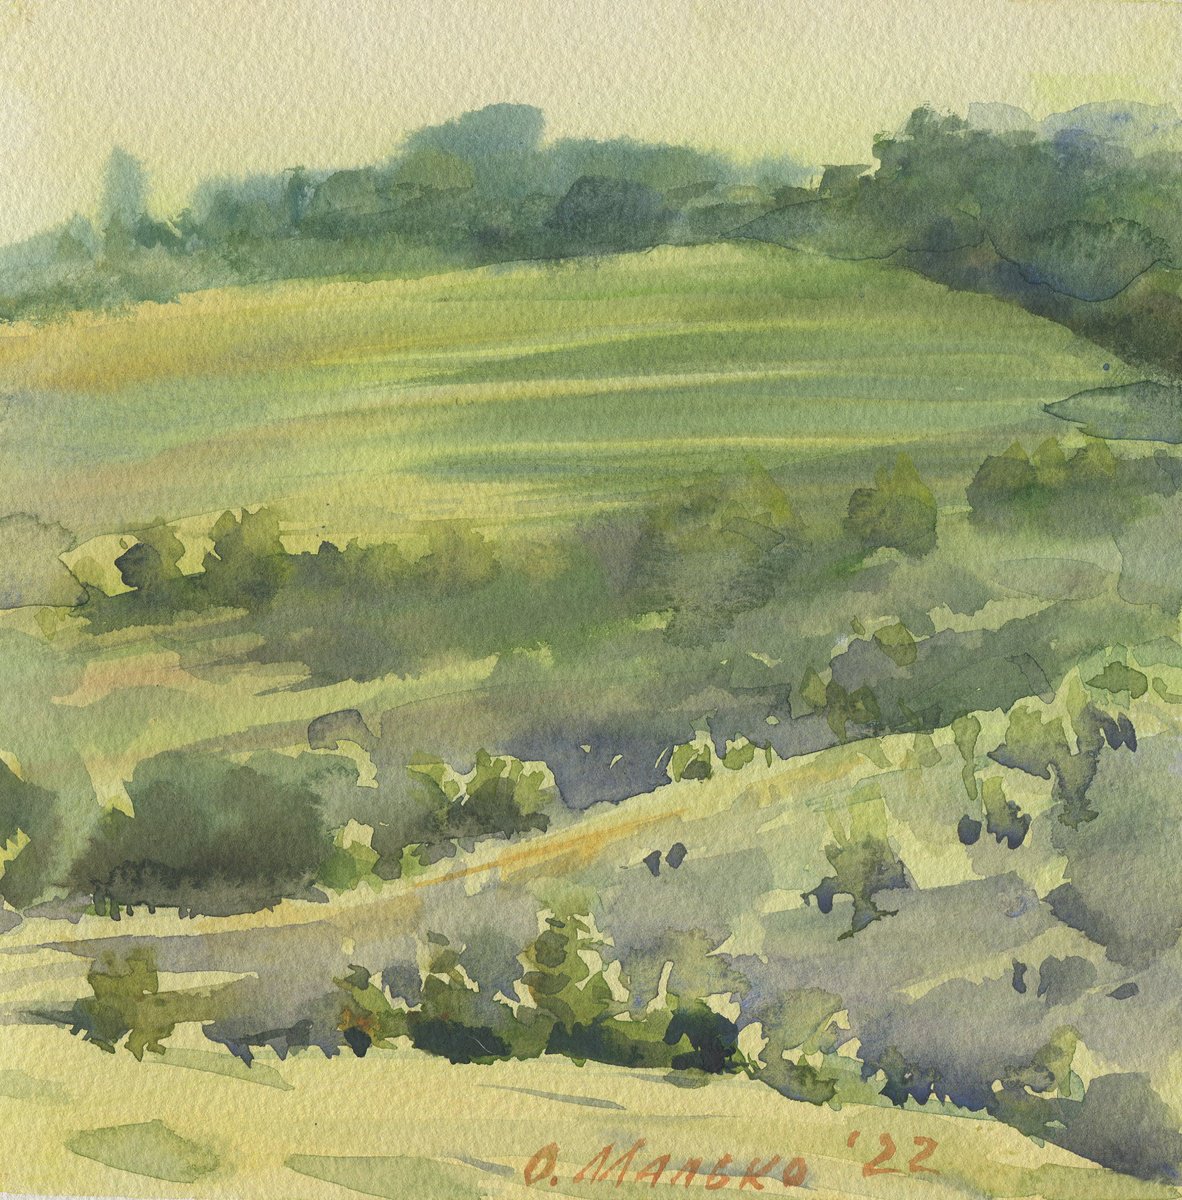 Green hills. Summer sketch / ORIGINAL picture Small size watercolor Square format by Olha Malko